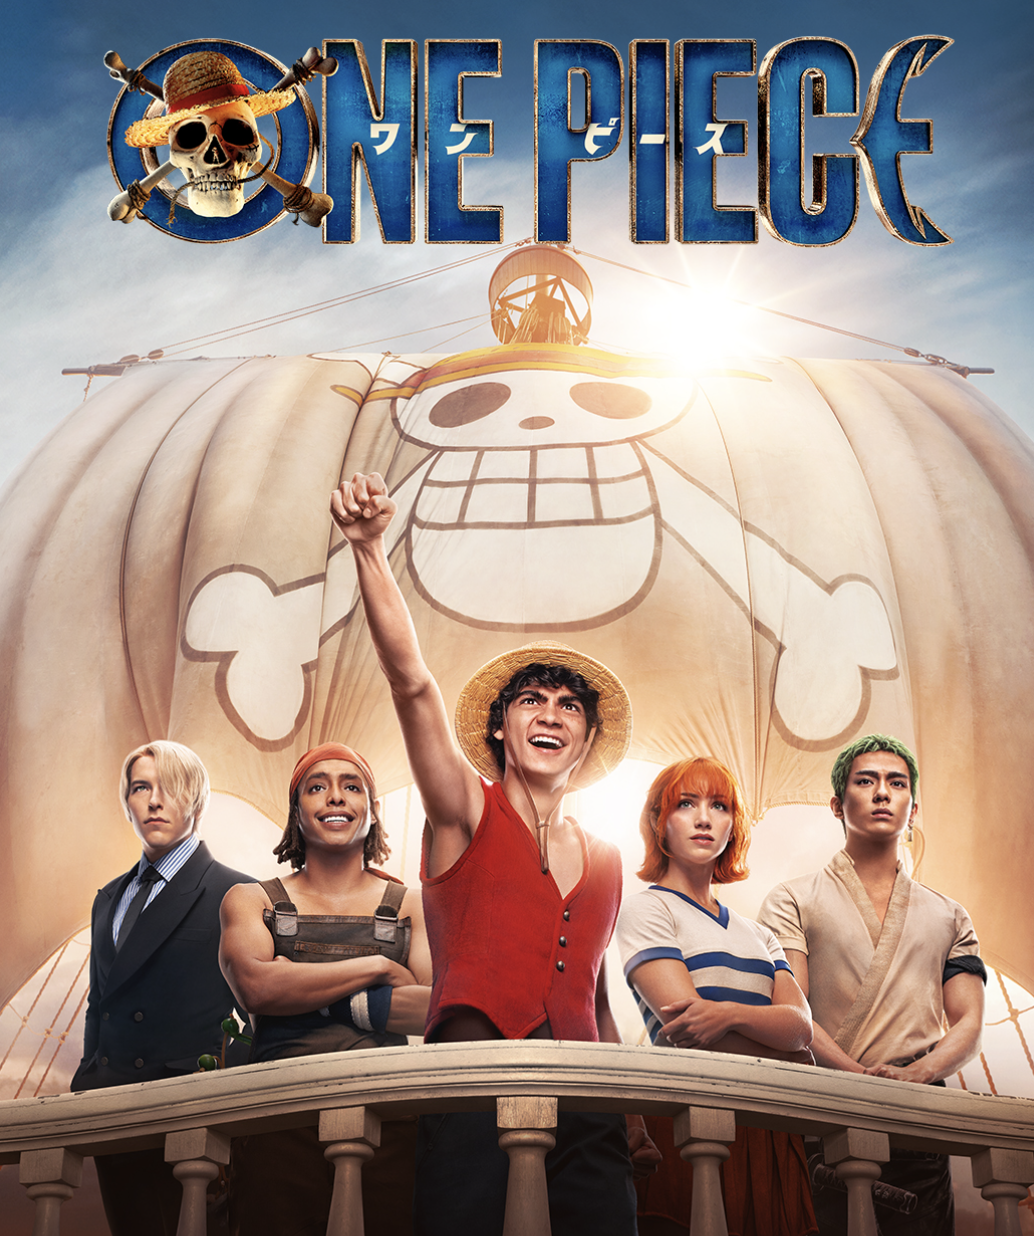 Further cementing the series as one of the greatest anime, the One Piece manga was adapted into a live-action released in August. The series has a 95% average audience score on Rotten Tomatoes, a testament to its success.